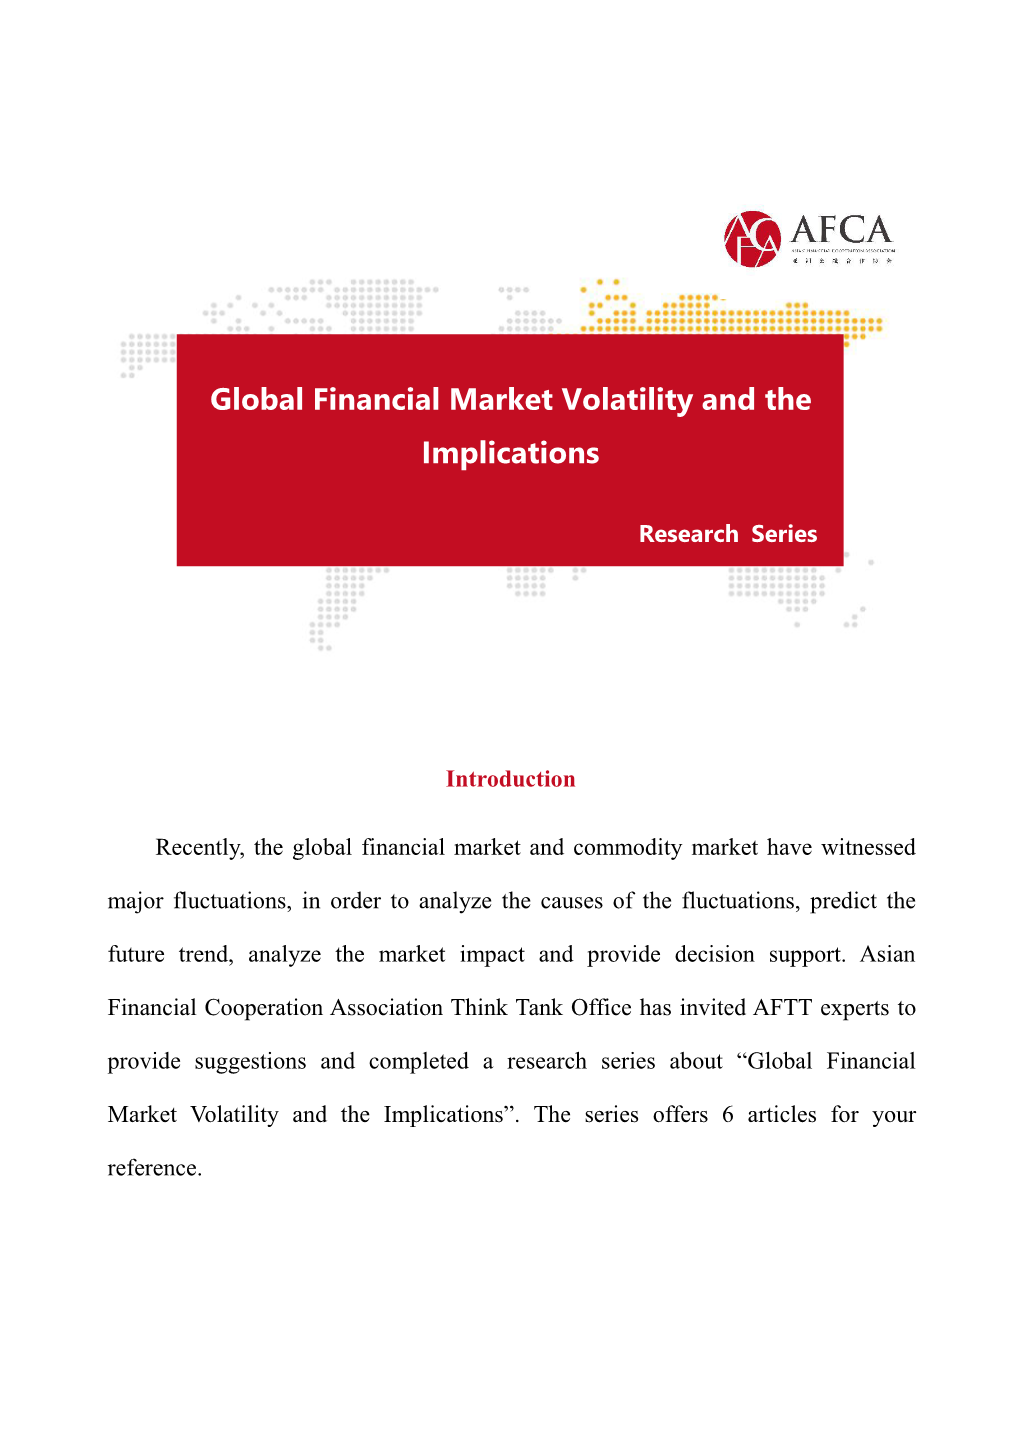 Global Financial Market Volatility and the Implications